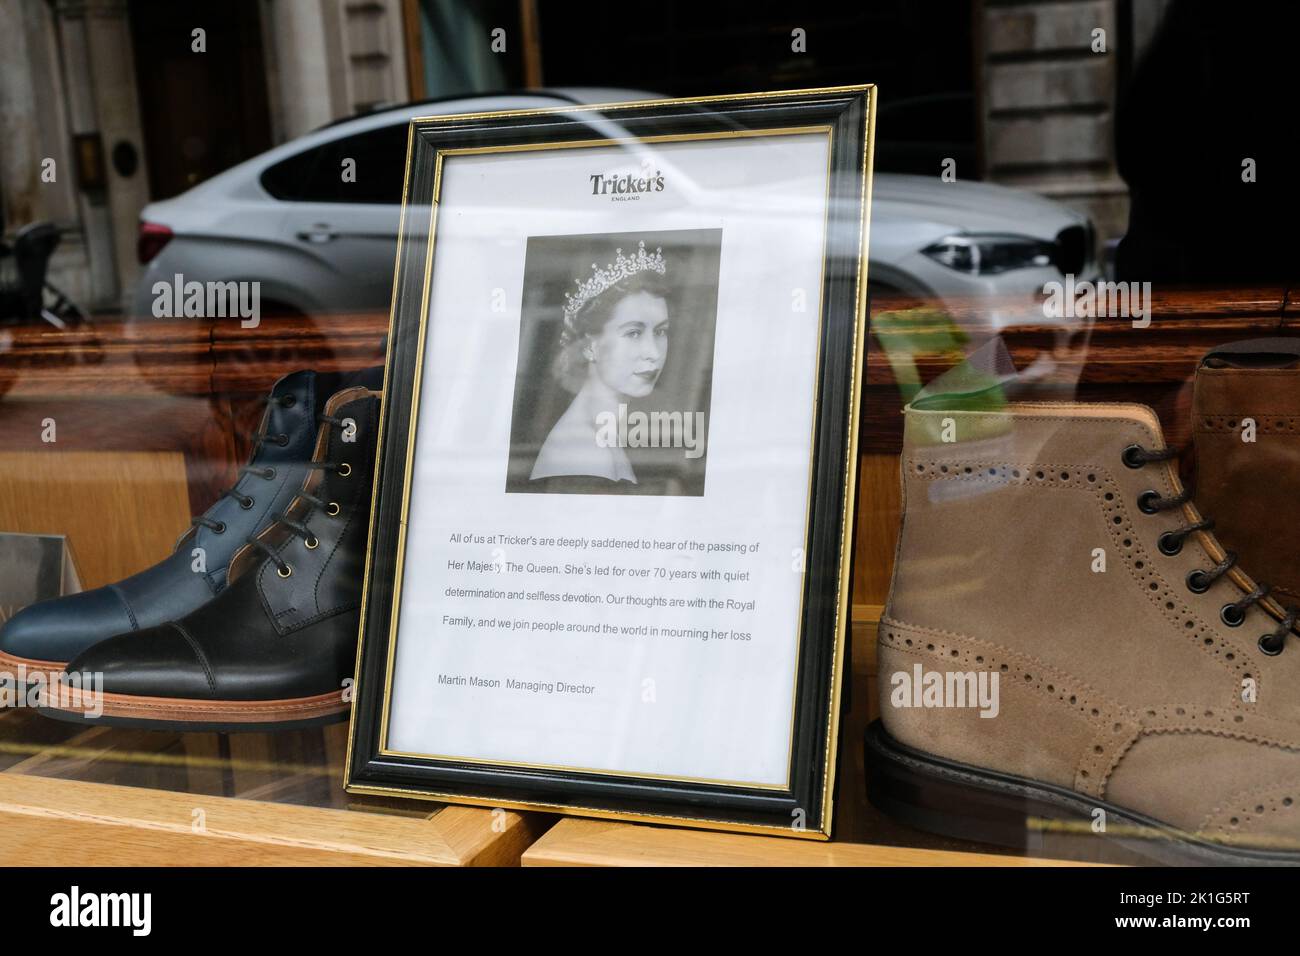 Jermyn Street, London, UK. 18th Sept 2022. Mourning the death of Queen Elizabeth II aged 96. Shop windows near Piccadilly display pictures and dedications to Queen Elizabeth. Tricker's, Jermyn Street. Credit: Matthew Chattle/Alamy Live News Stock Photo